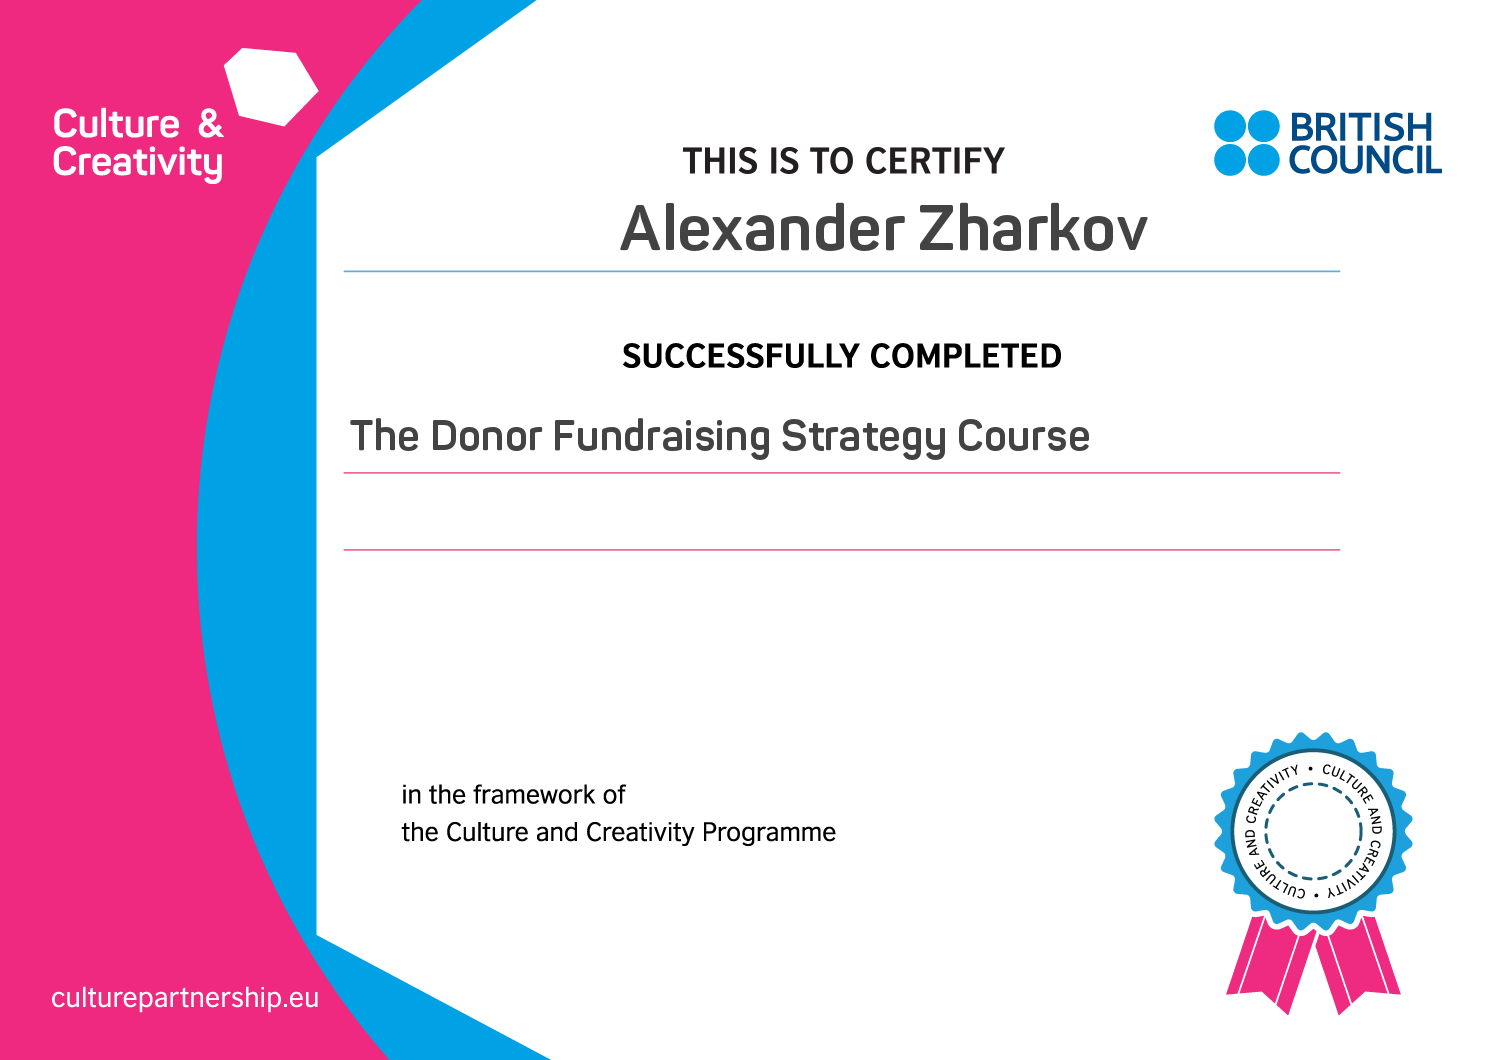 The Donor Fundrising Strategy Course